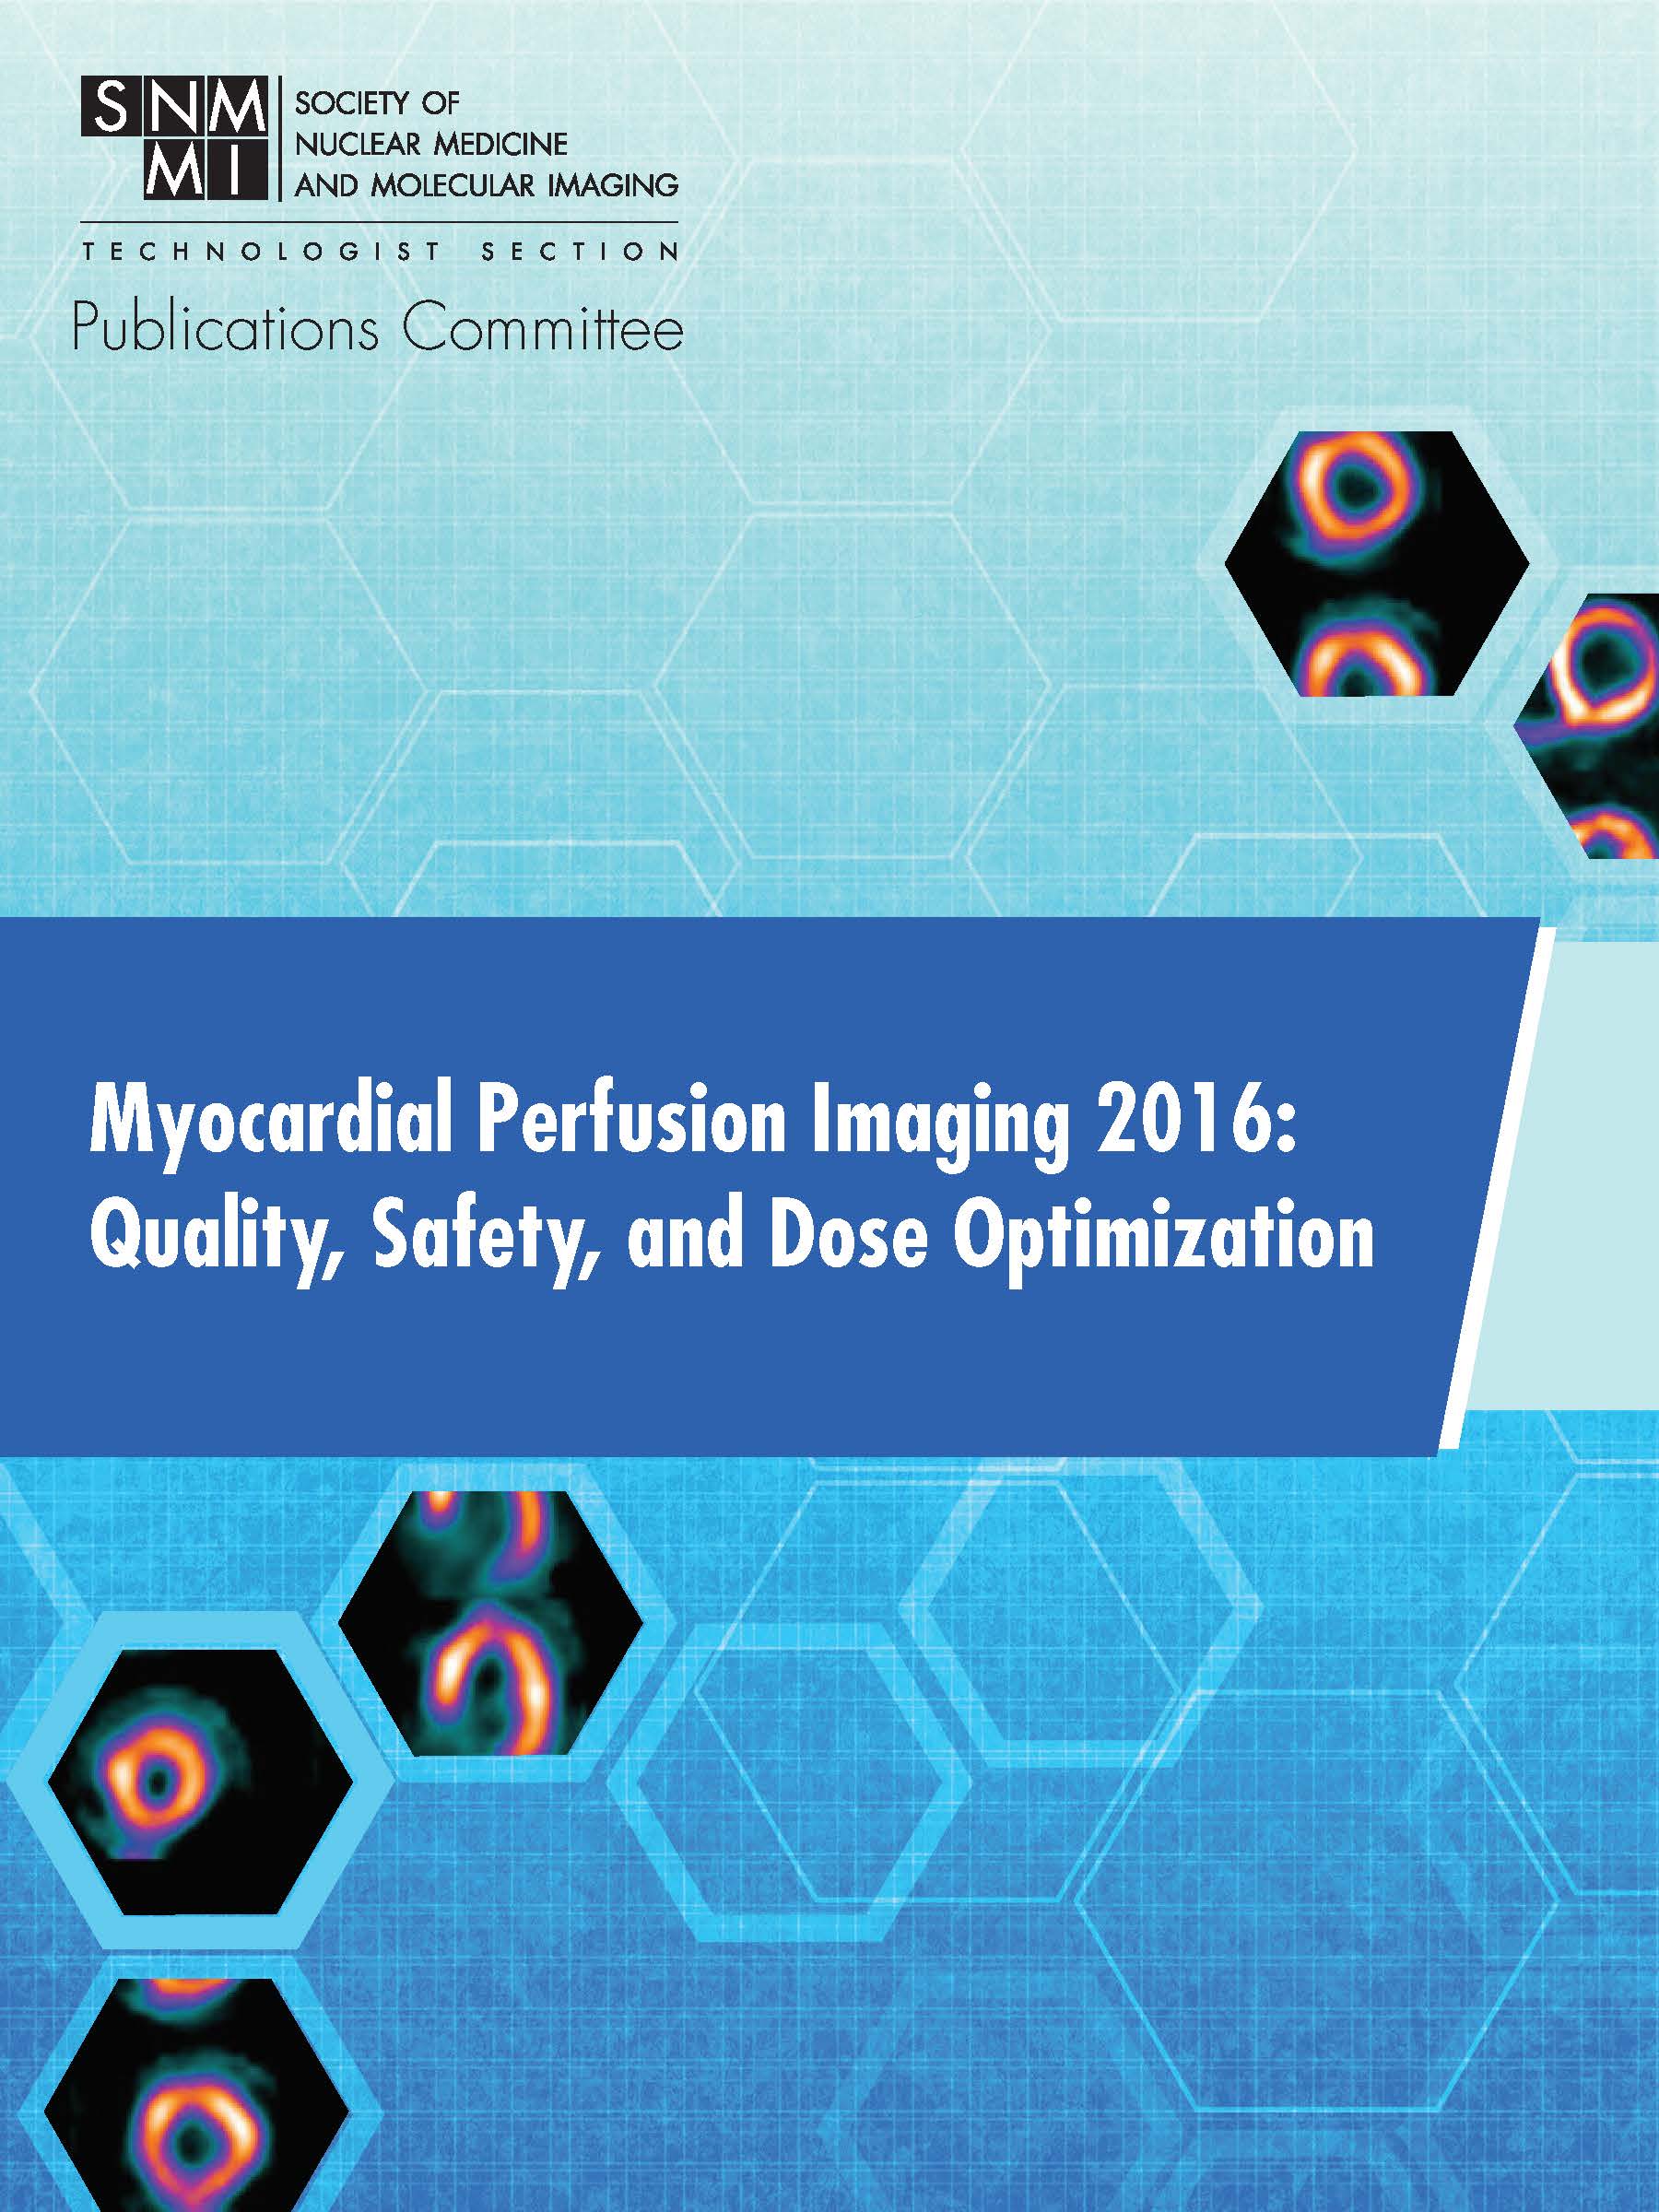 Myocardial Perfusion Imaging 2016: Quality, Safety, and Dose